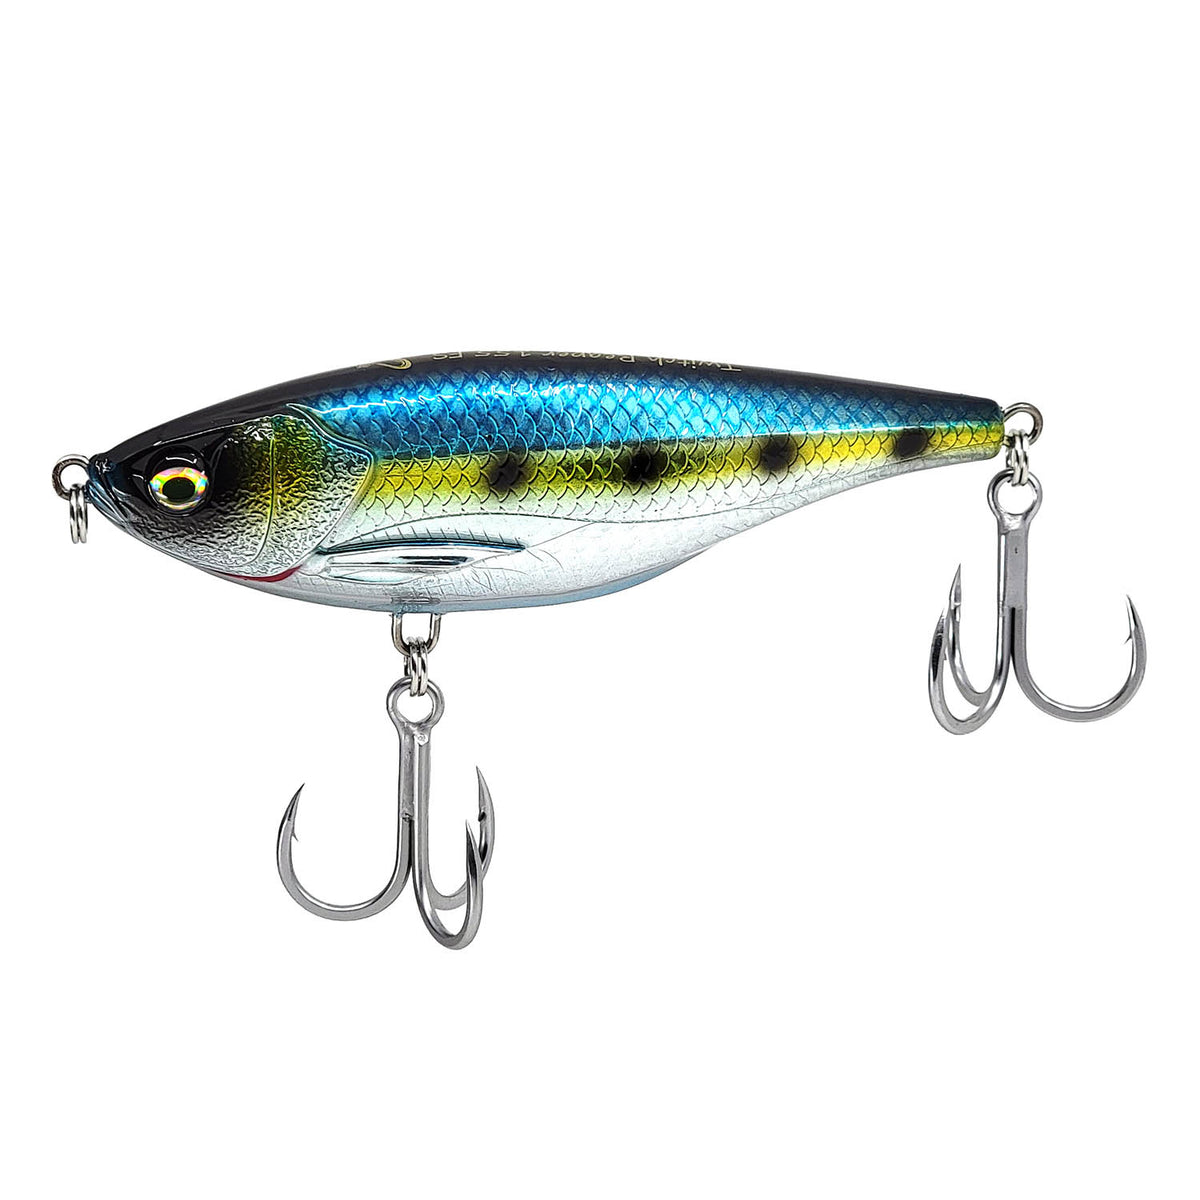 Fishing Lures Accessories Twitching Lures Twitch Stock Photo